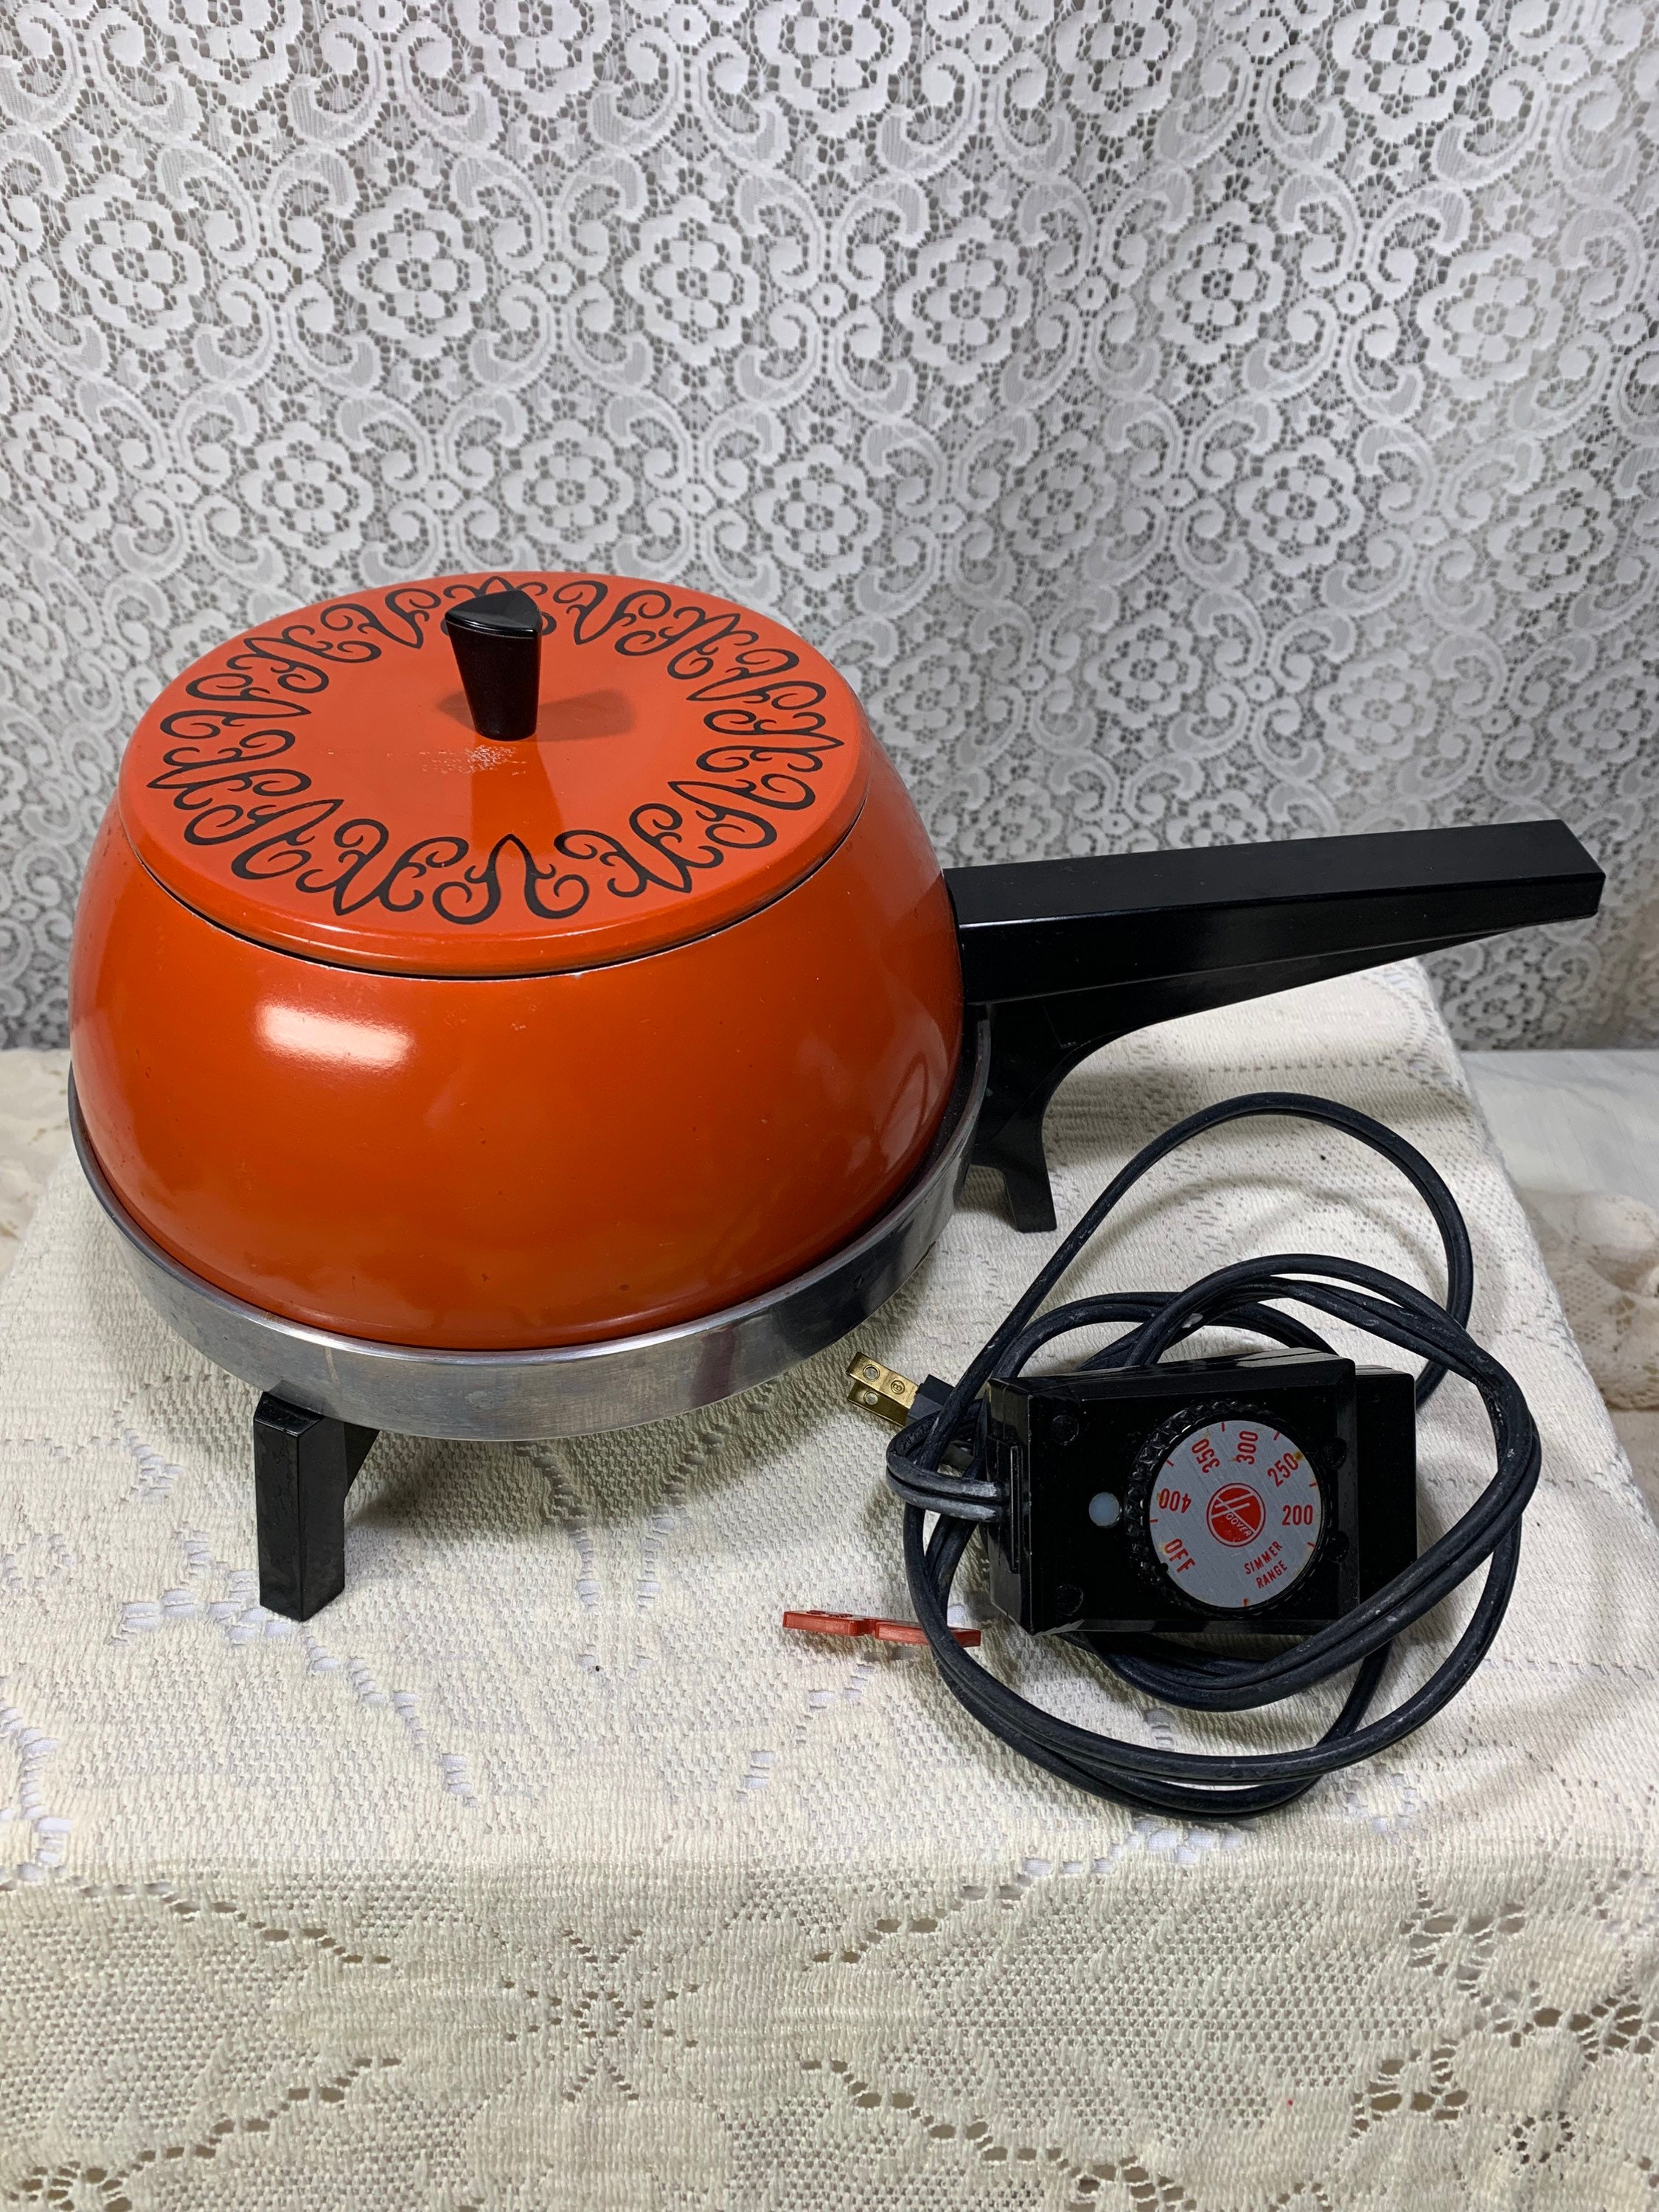 VTG Oster Electric Fondue Set Almond Brown Pot With Forks in Box Works EUC